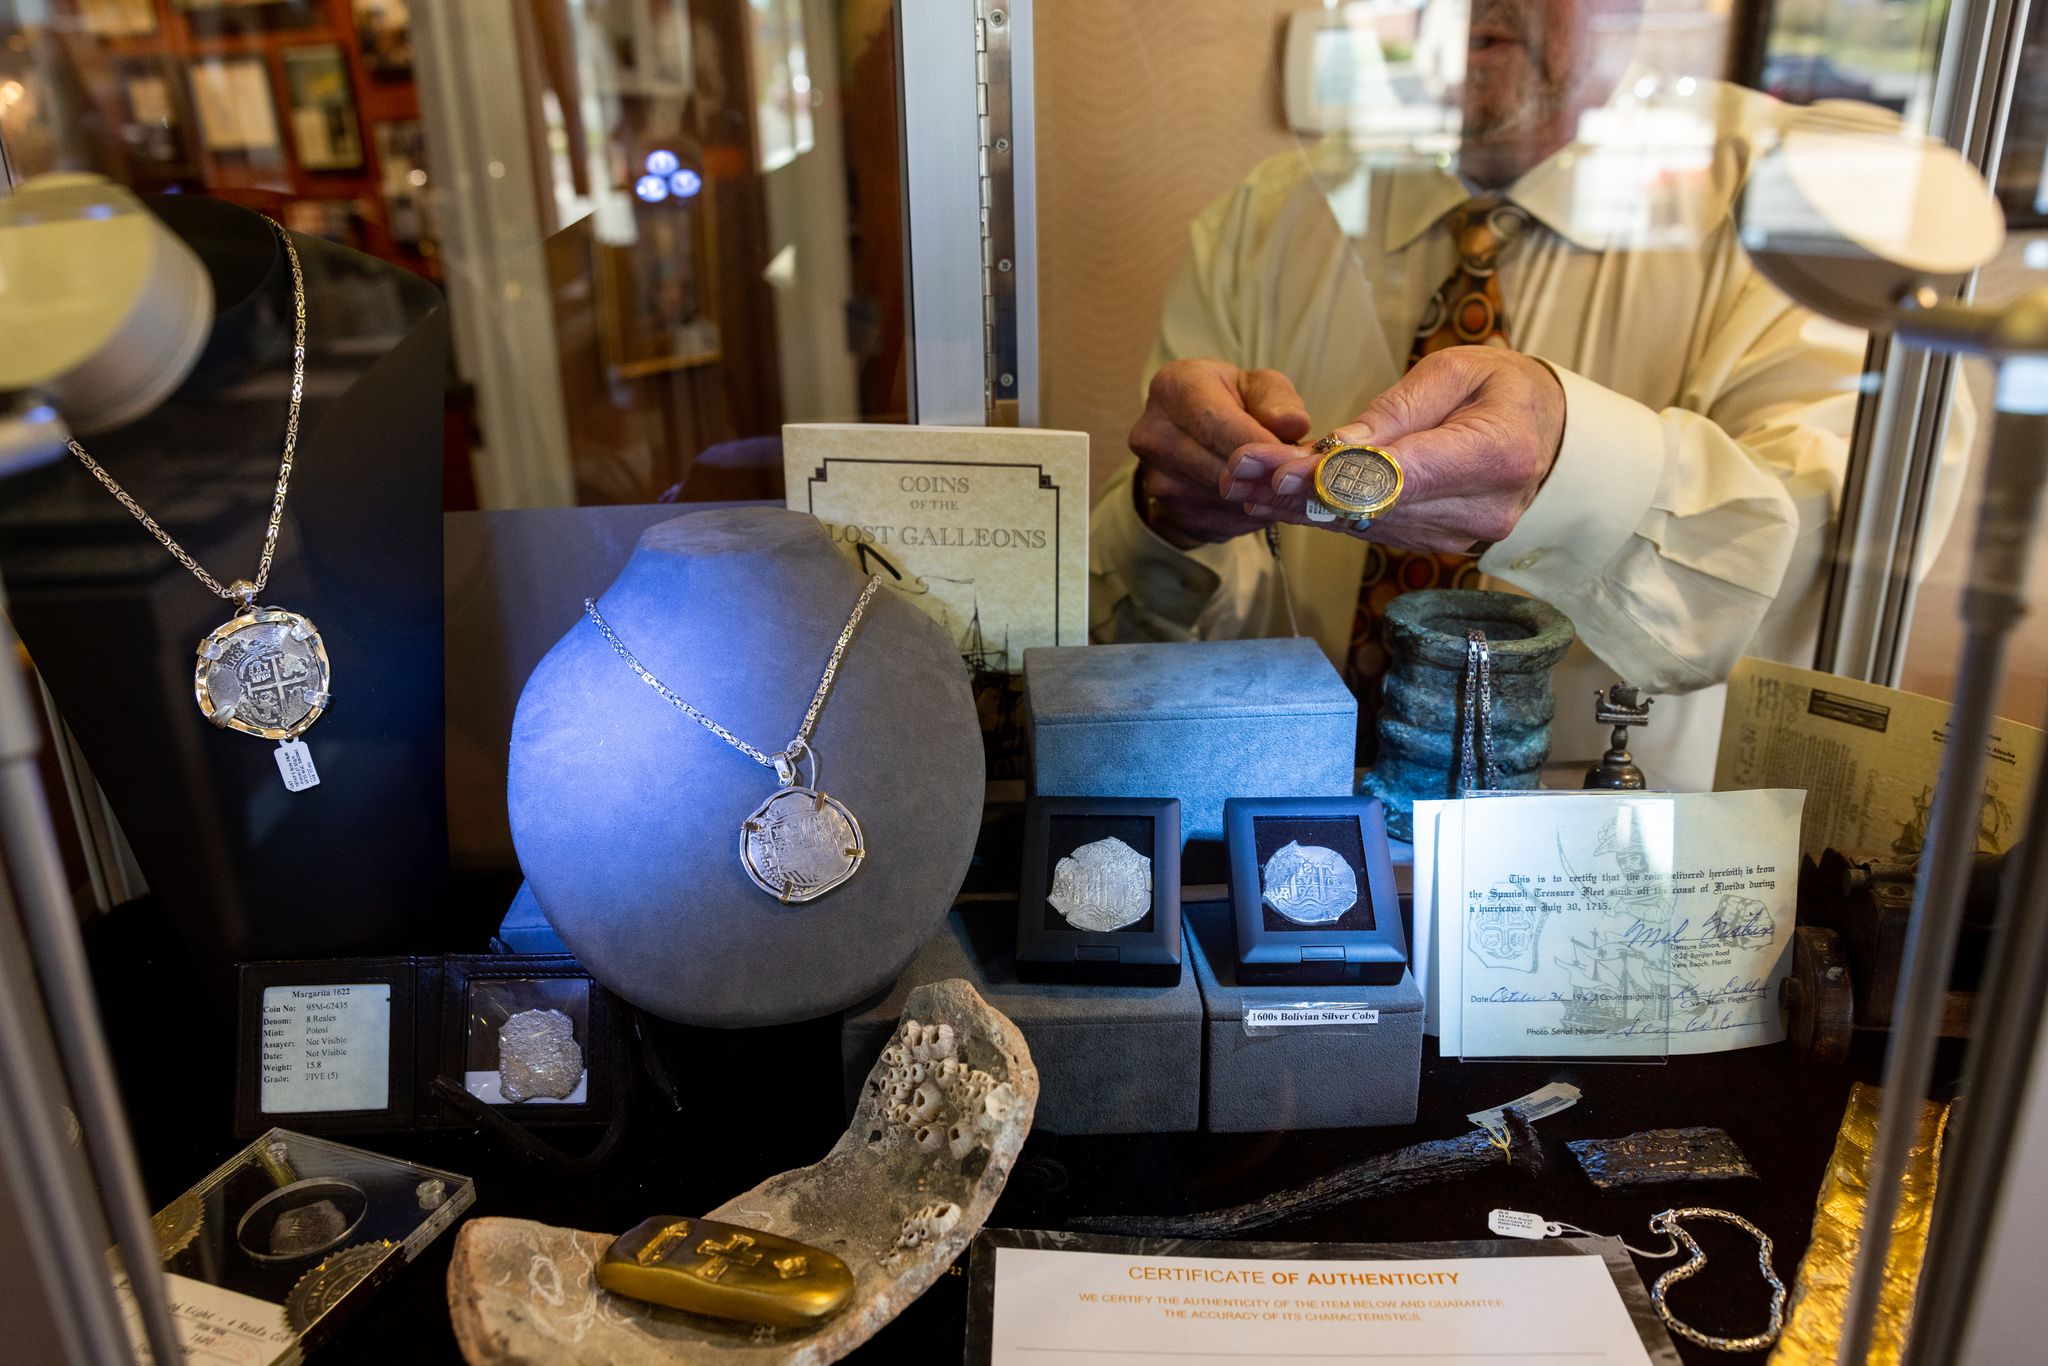 Gary Simon displays his rare coin and treasure collection in his shop in High Point, NC.